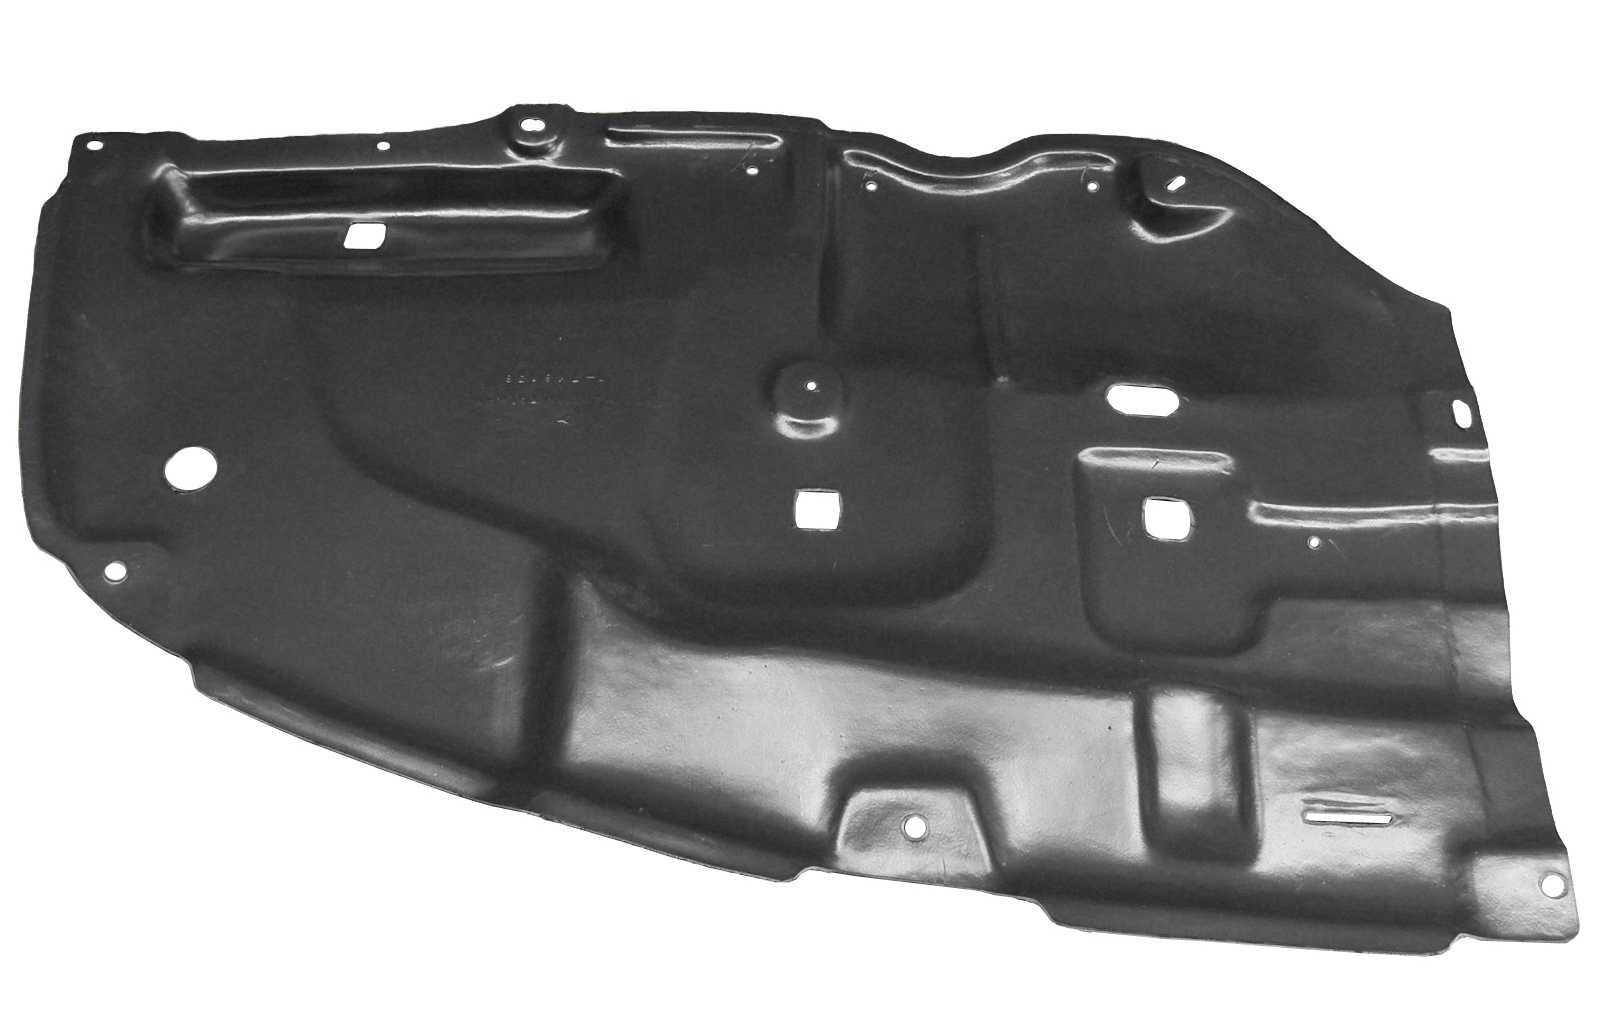 Aftermarket UNDER ENGINE COVERS for TOYOTA - AVALON, AVALON,11-12,Lower engine cover